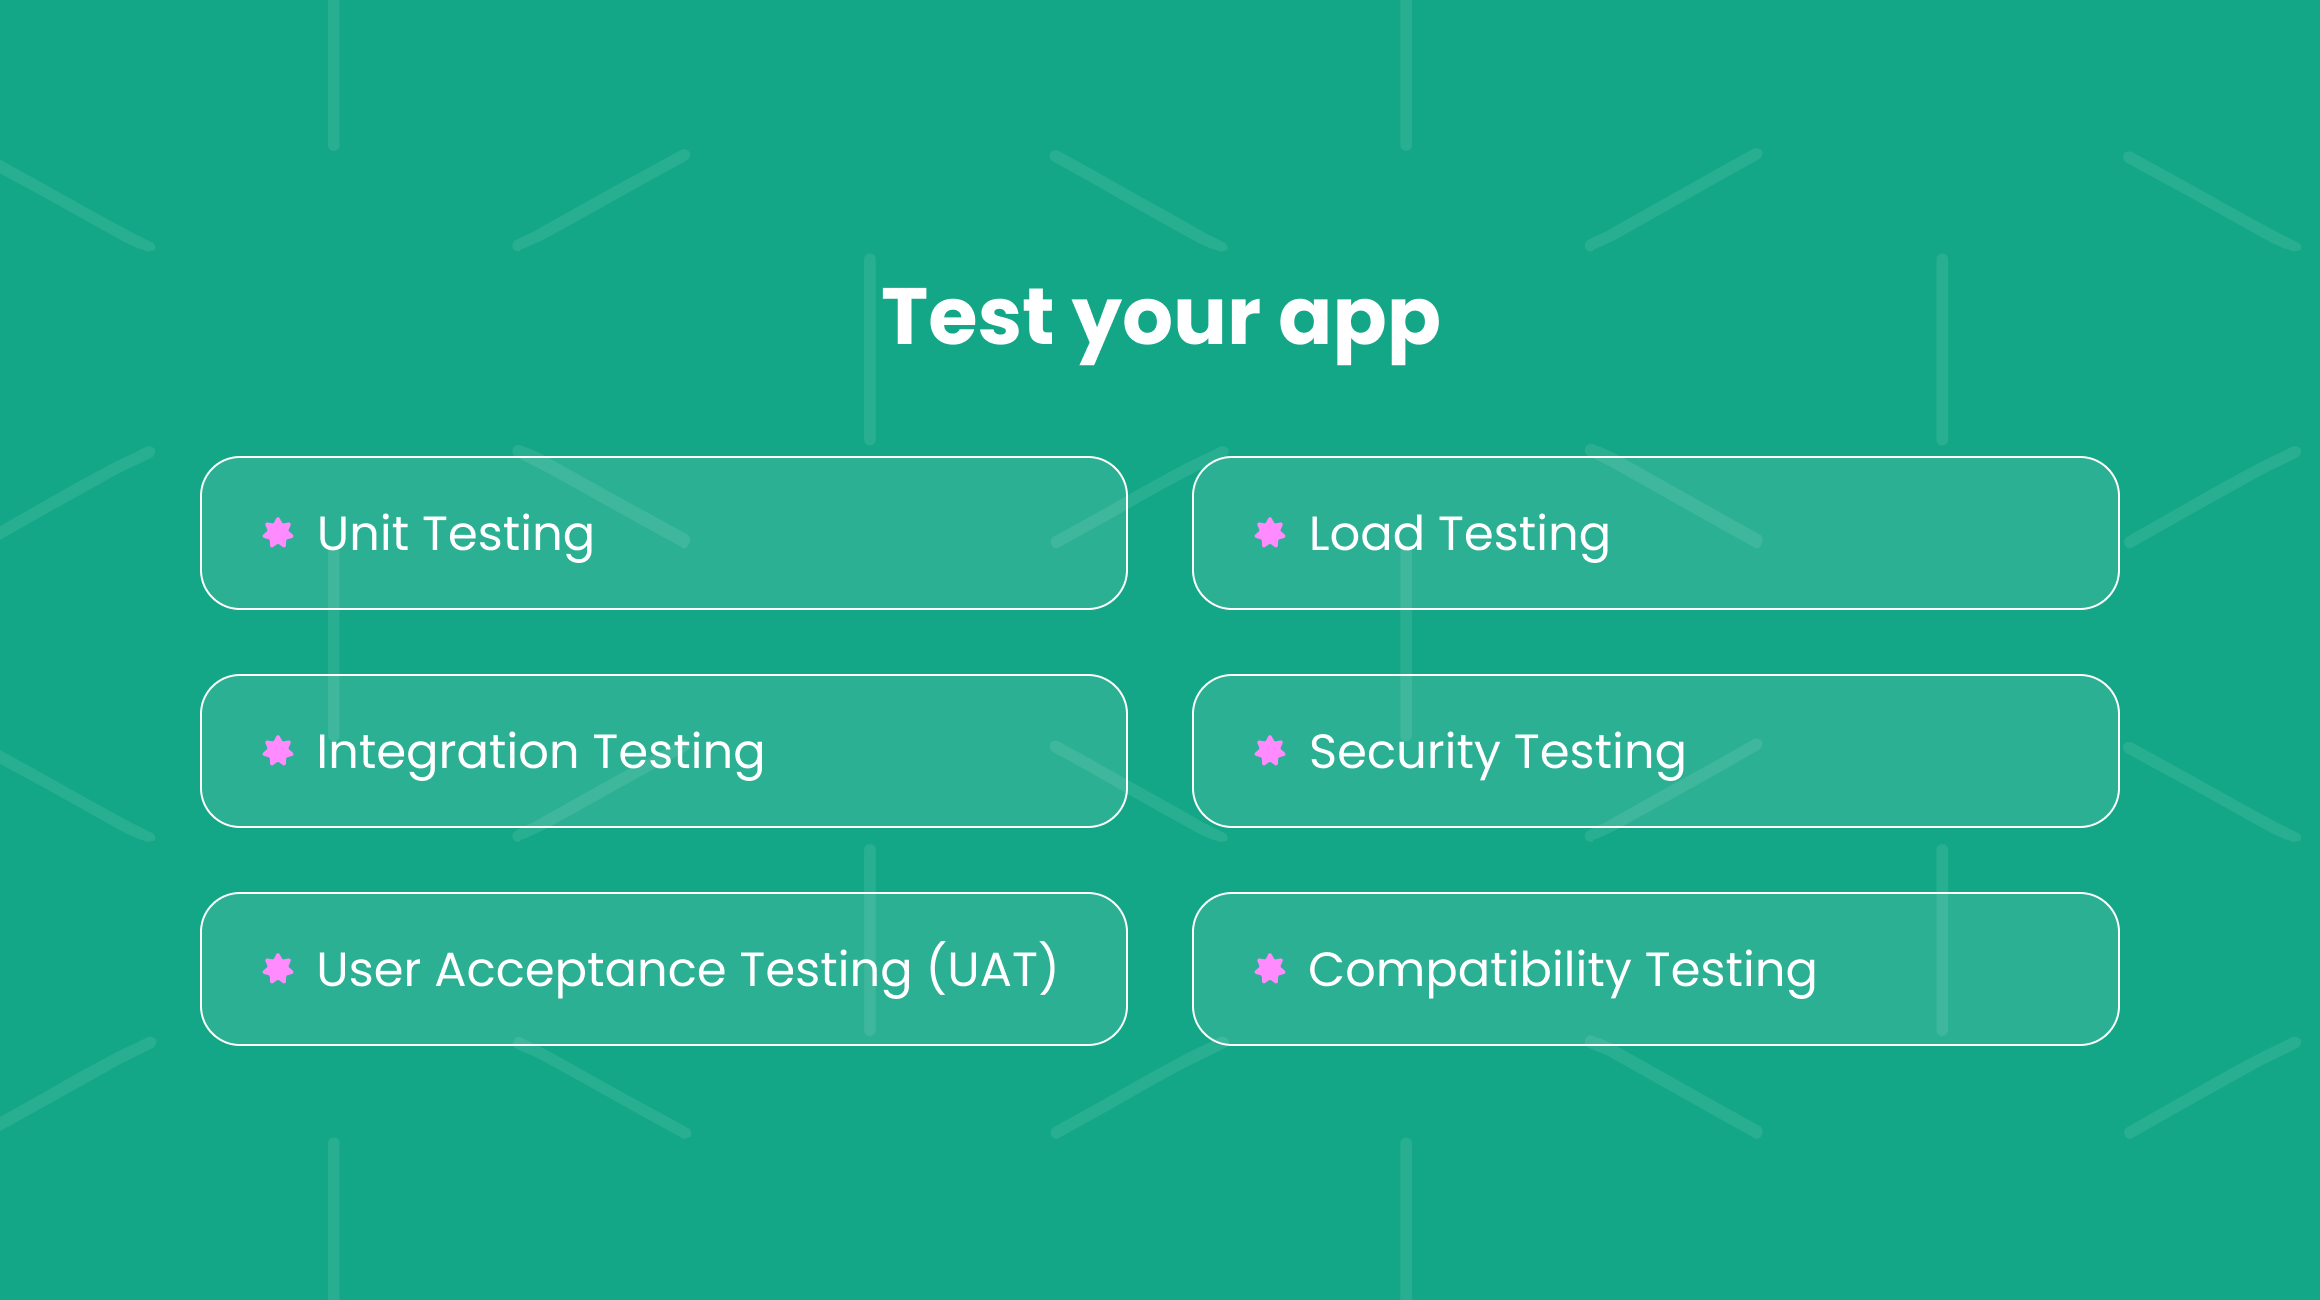 Testing your app